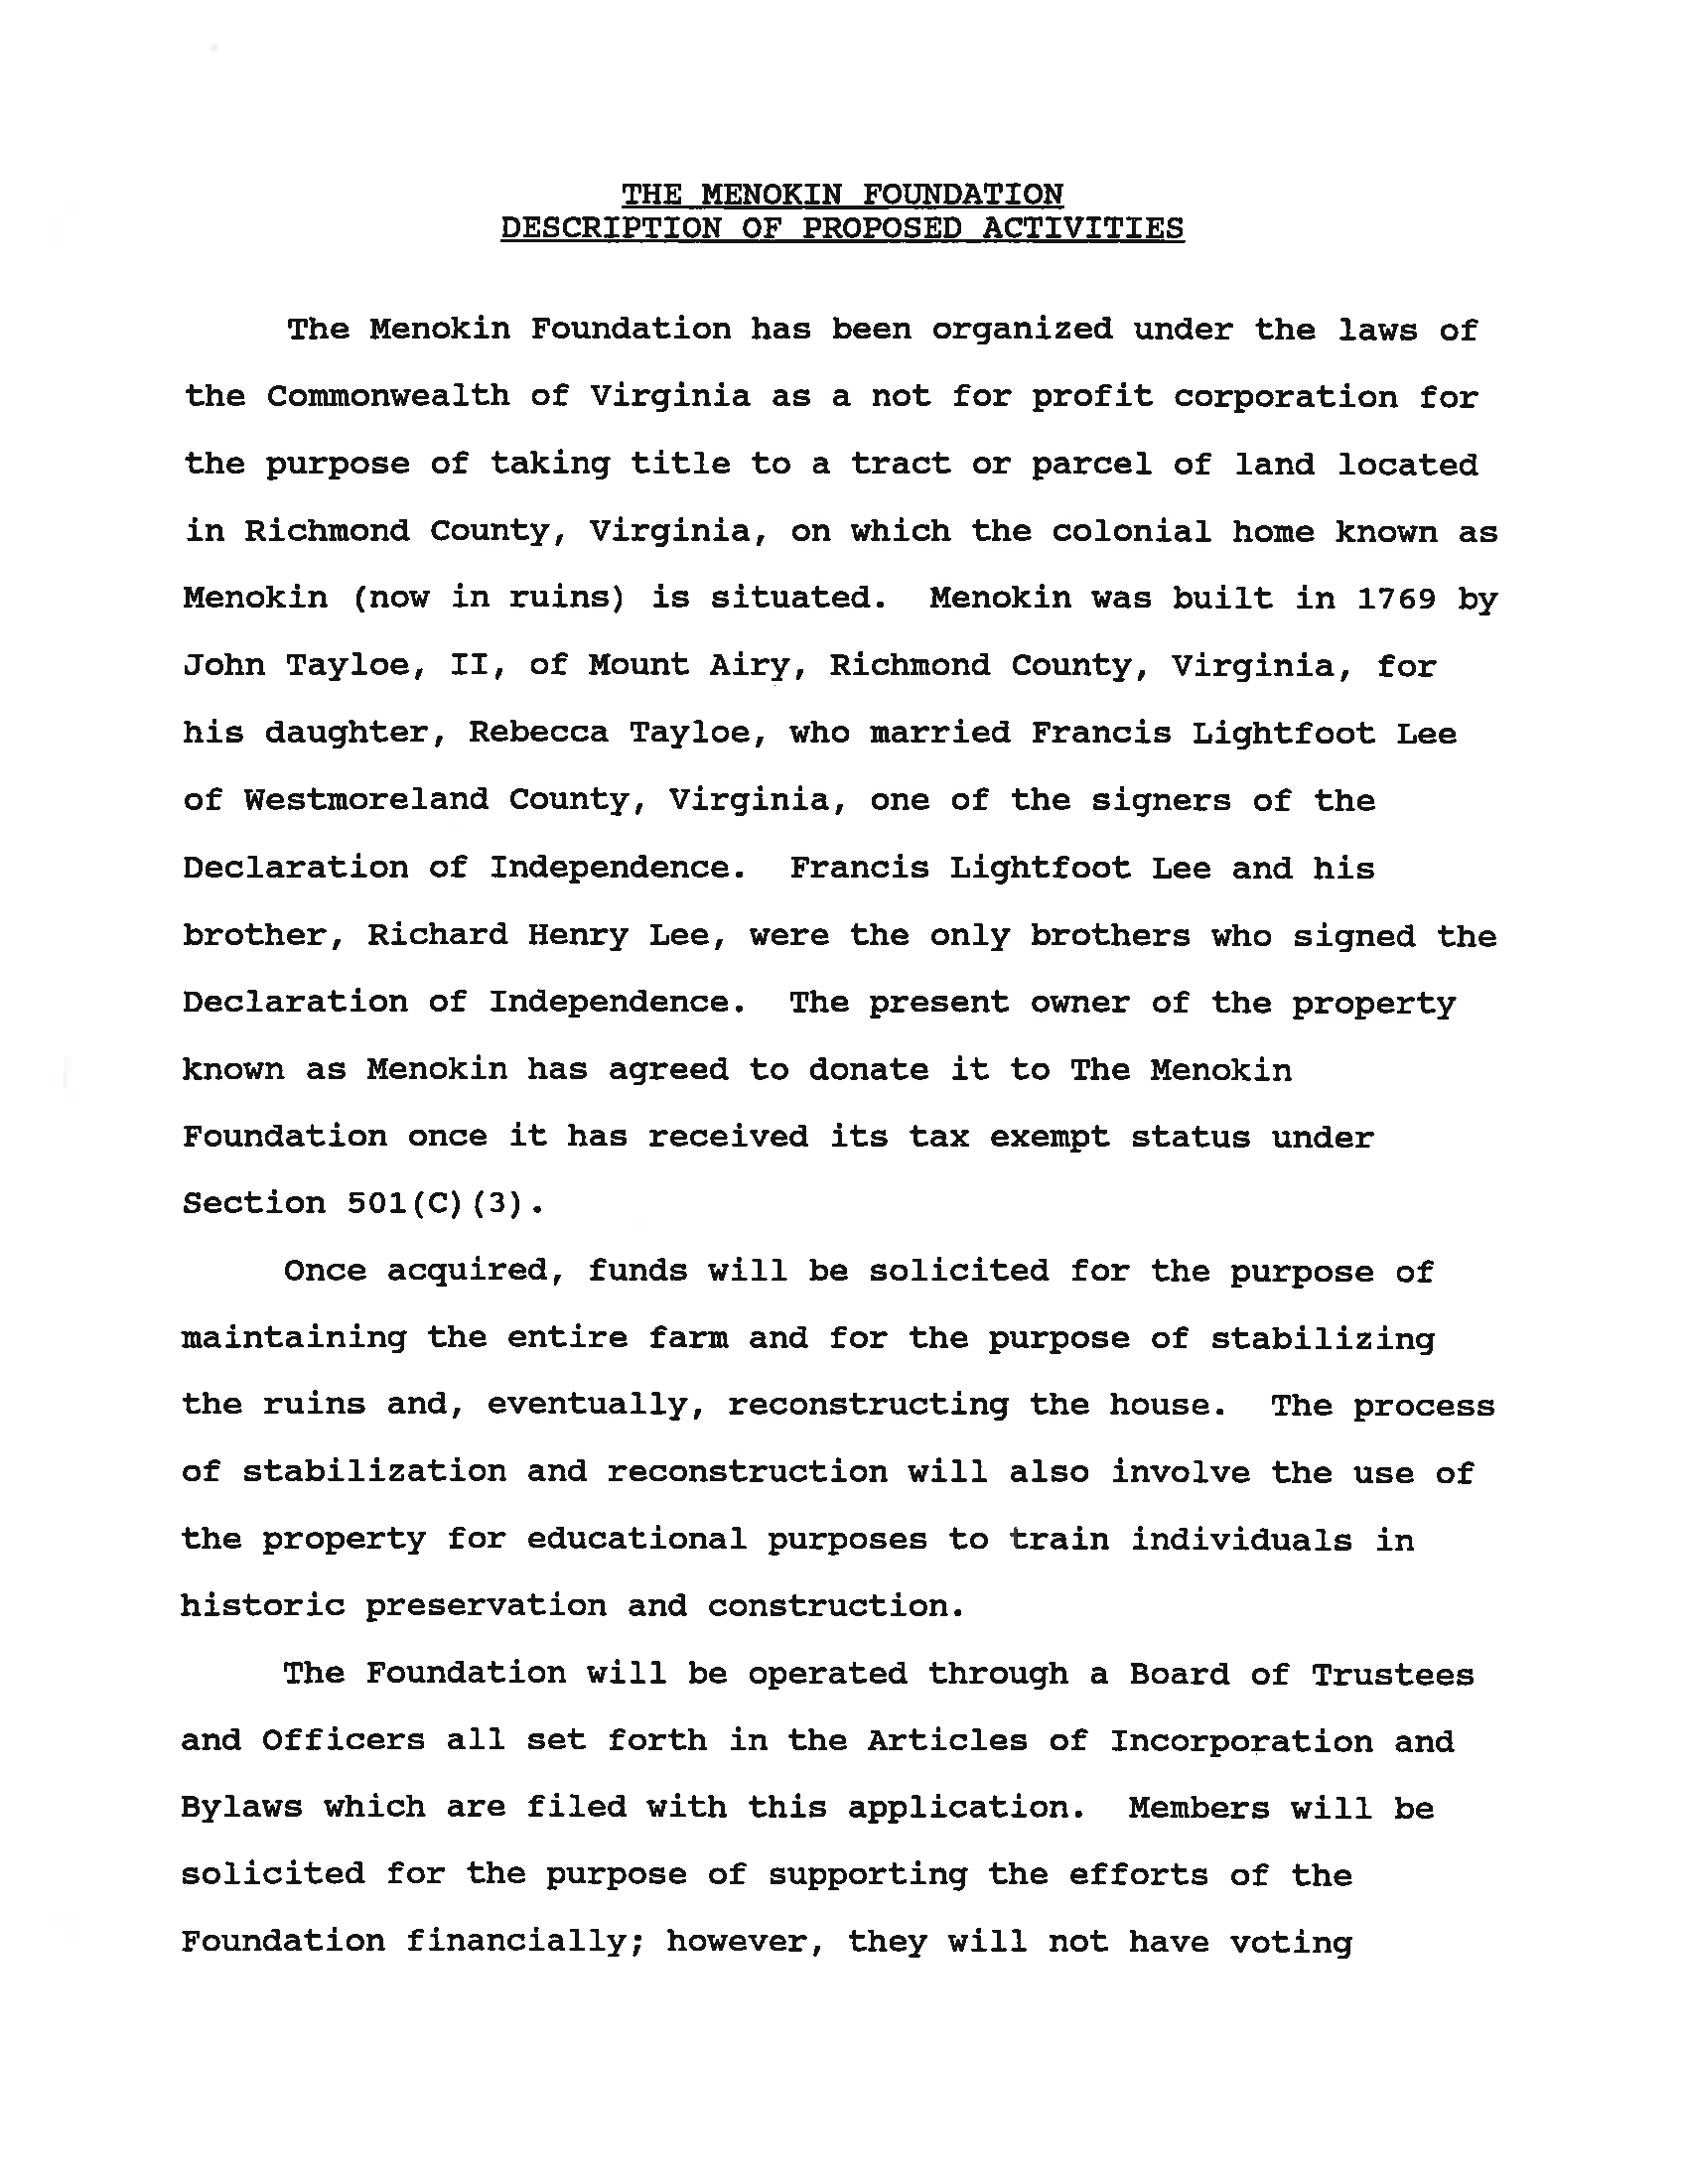 Menokin Foundation Articles of Incorporation_Page_13.png